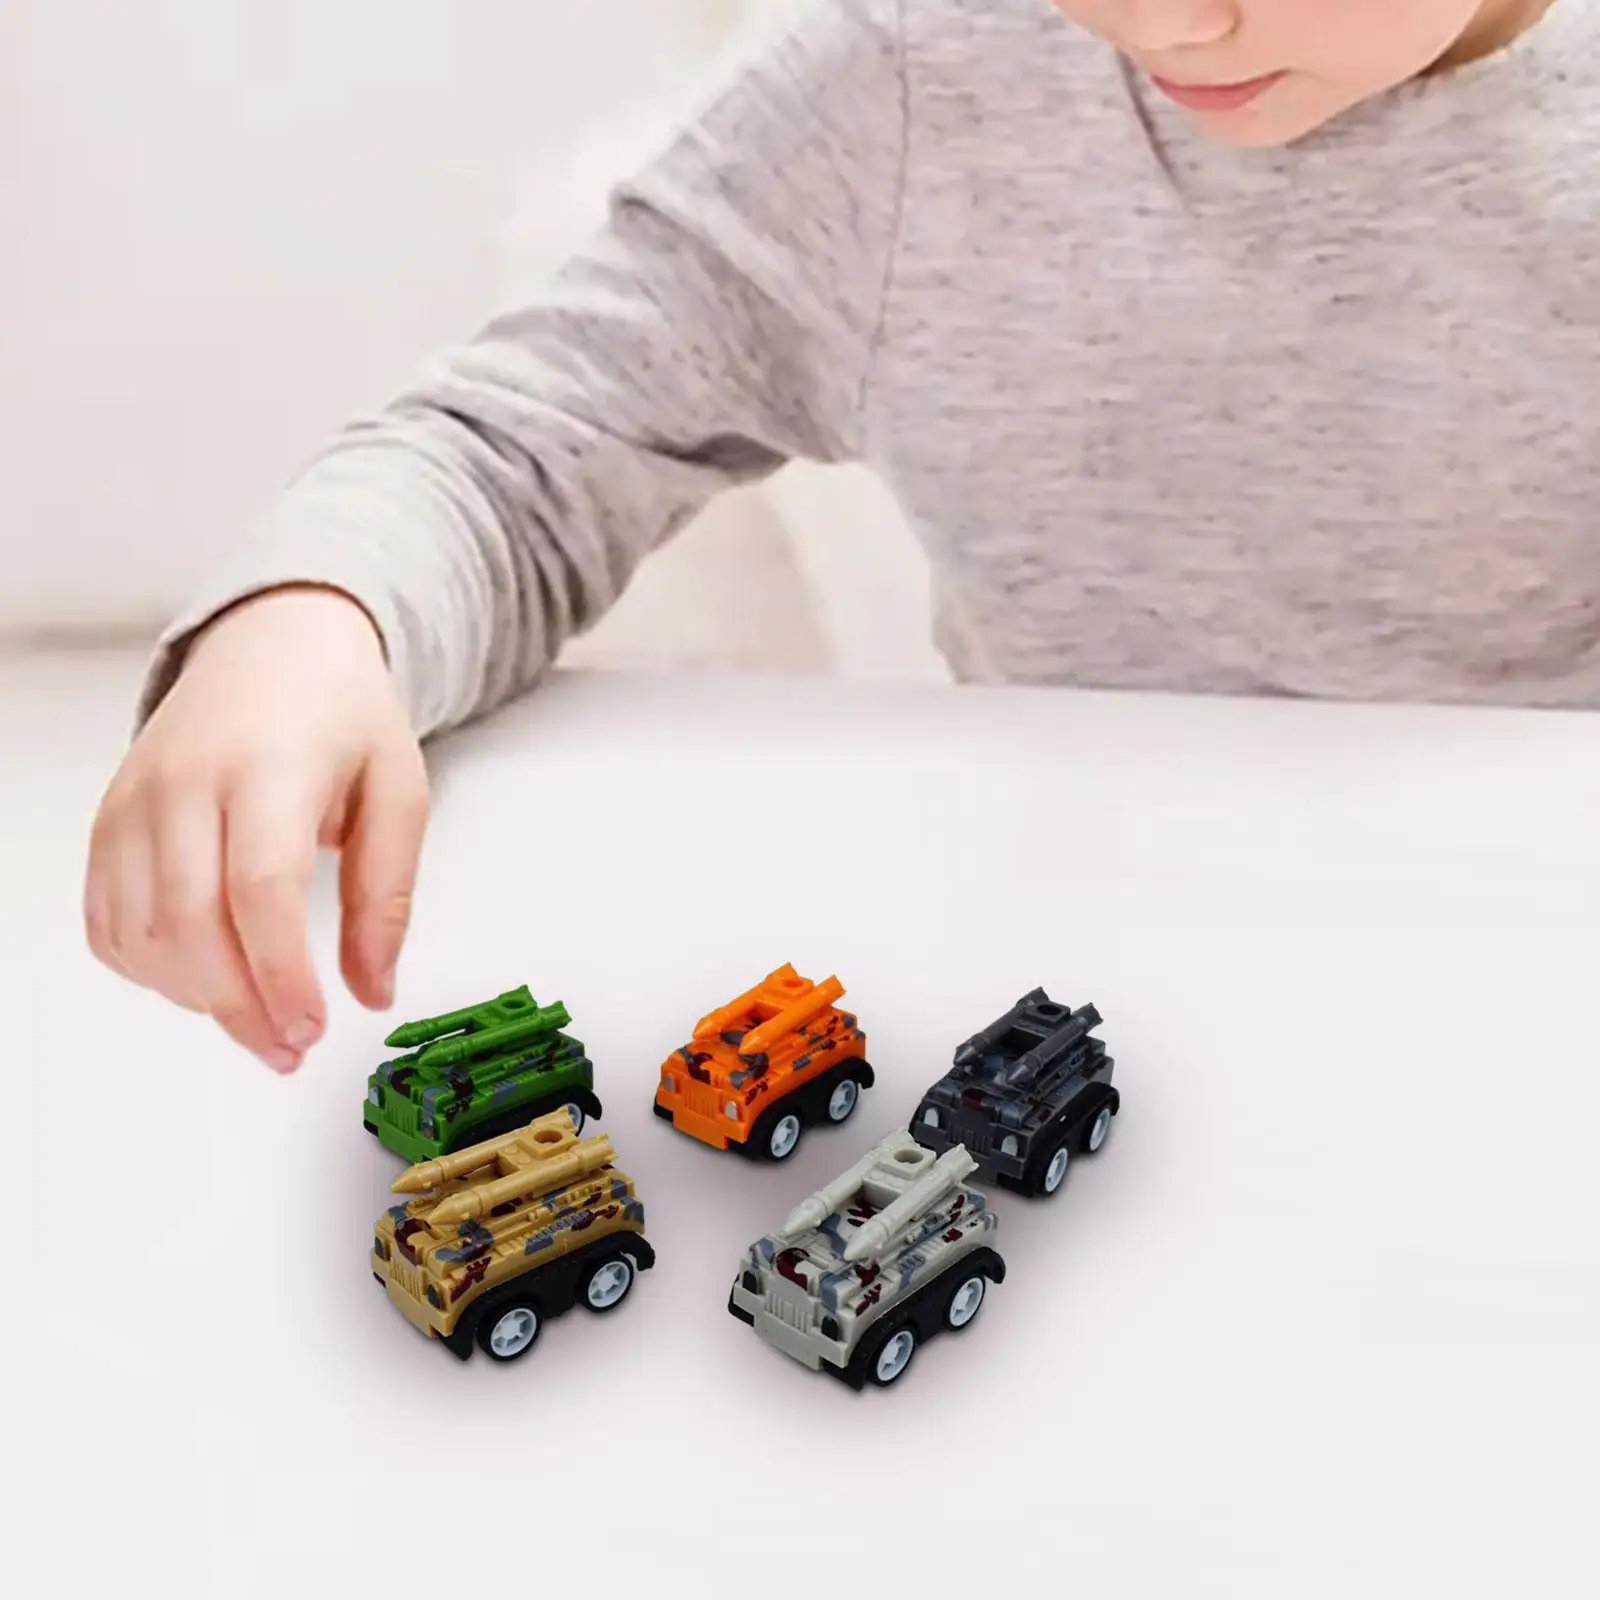 

Engineering Vehicle Inertial Car Toy Vehicles Toy Training Toys Boomerang Rocket Model Friction Car Toy for Presents